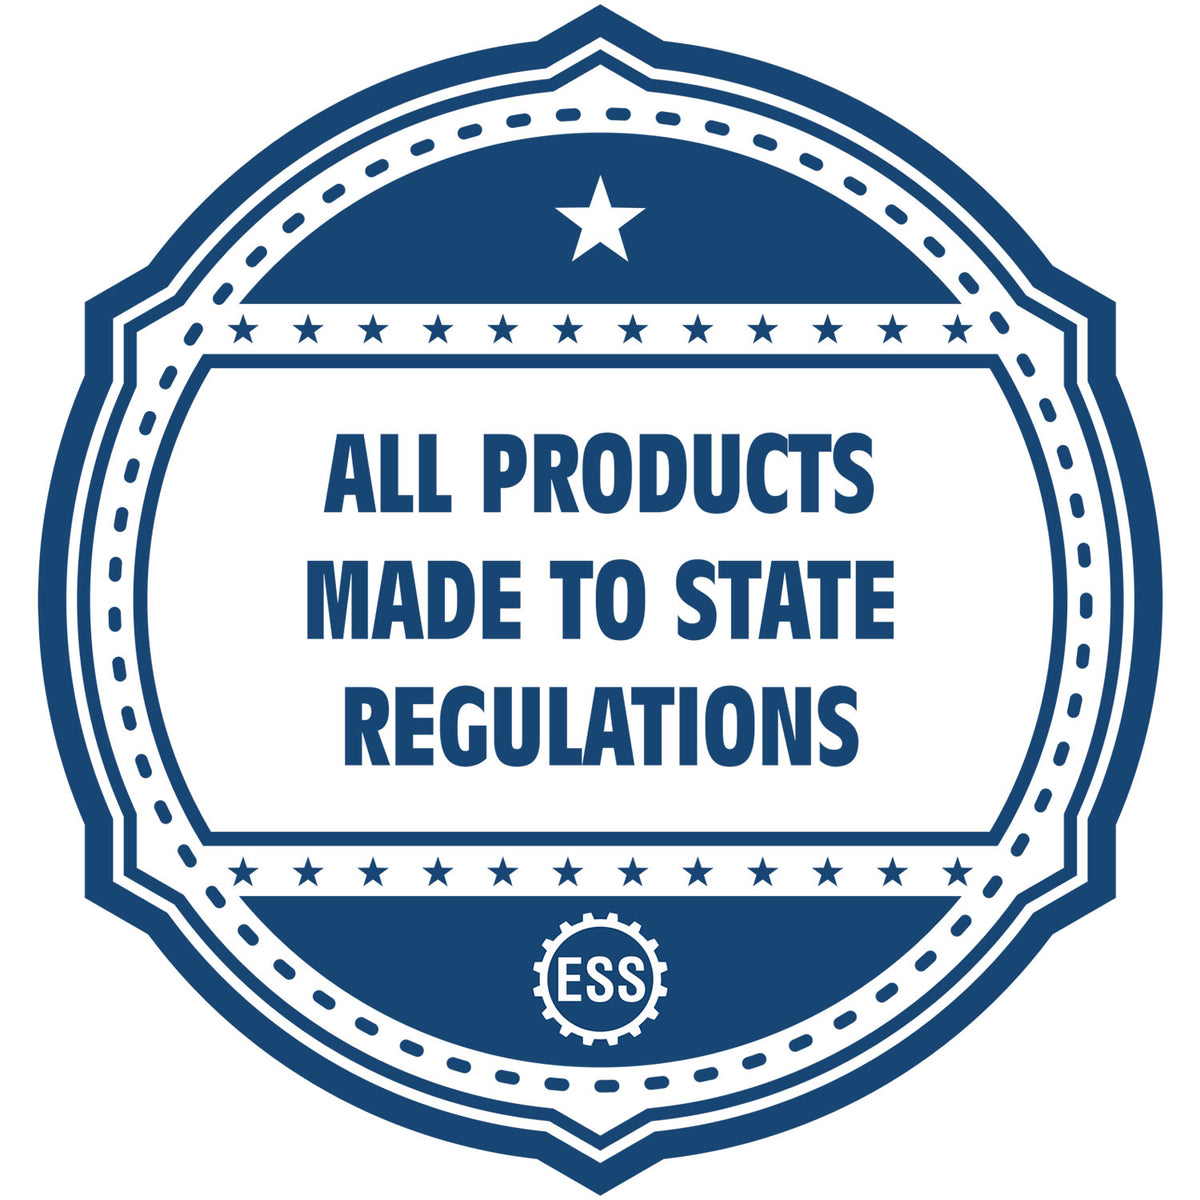 A blue icon or badge for the State of Massachusetts Extended Long Reach Geologist Seal showing that this product is made in compliance with state regulations.